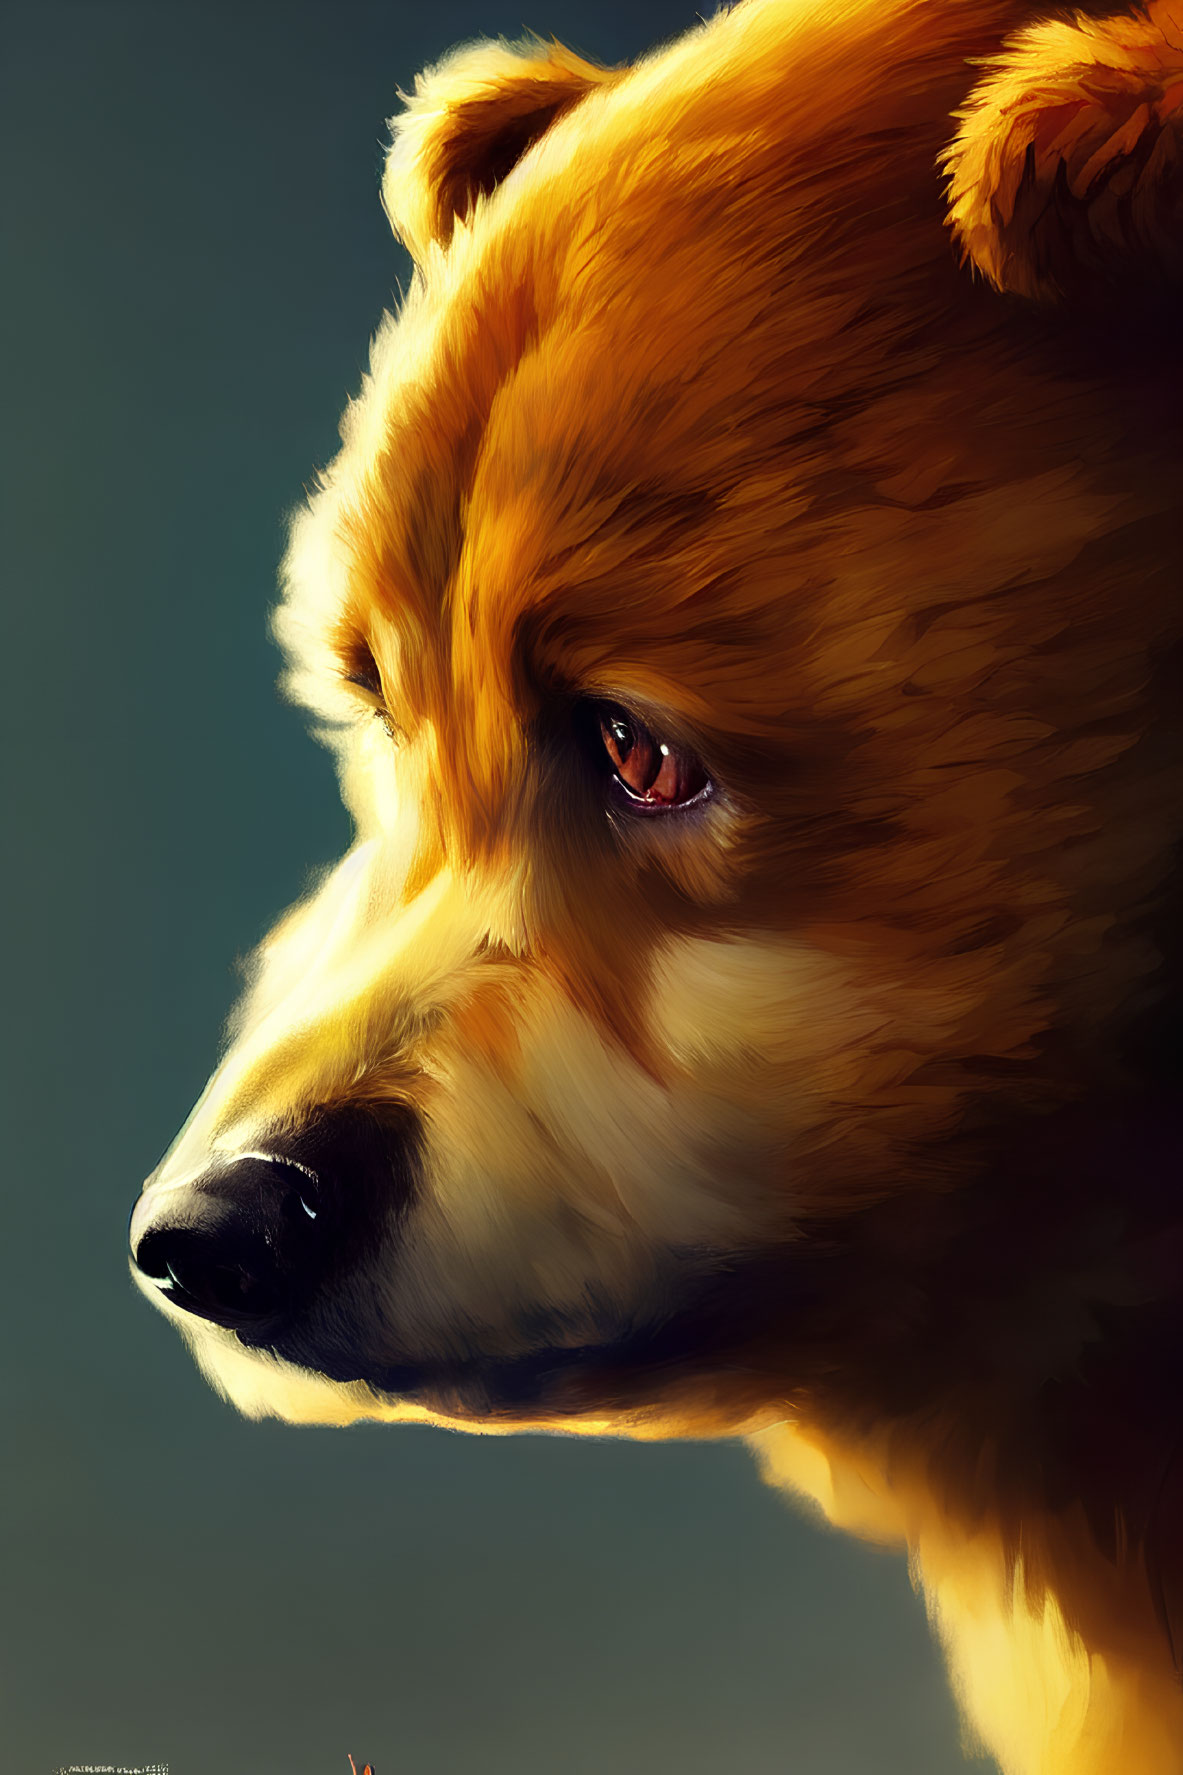 Detailed digital art portrait of a bear with intense gaze and intricate fur textures